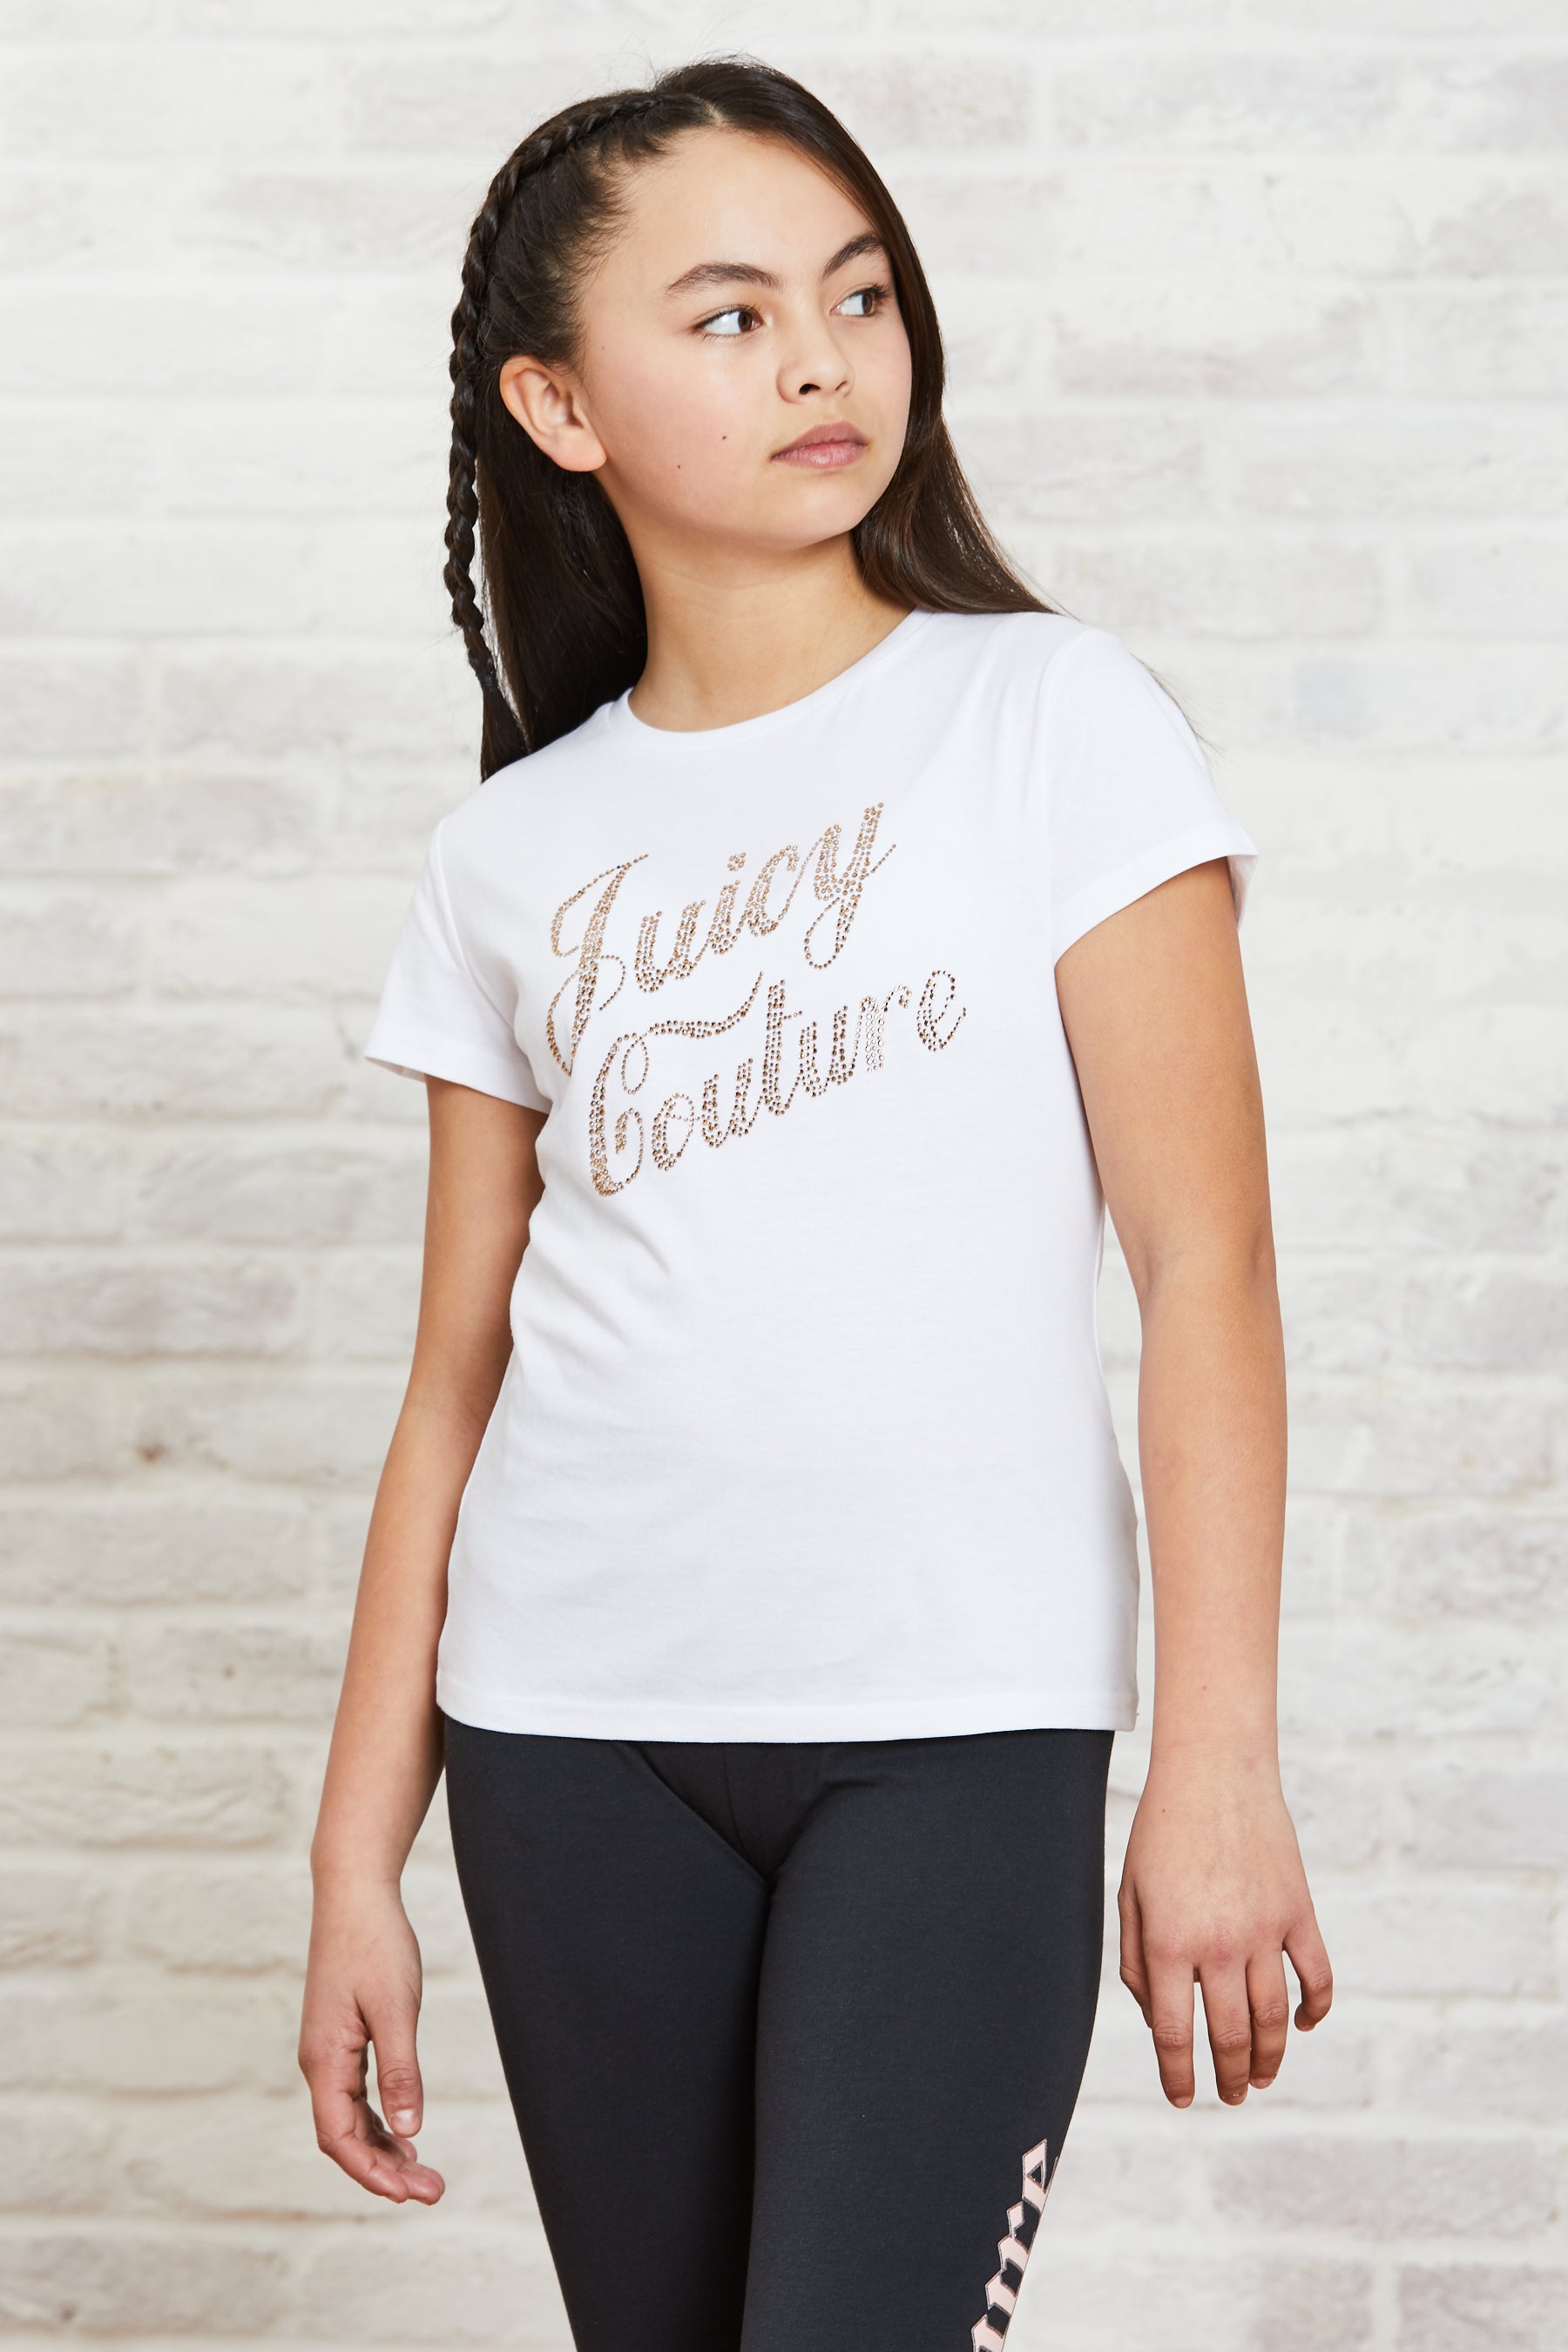 Girls Juicy Couture Juicy Branded T-Shirt Kids Sizes | eBay